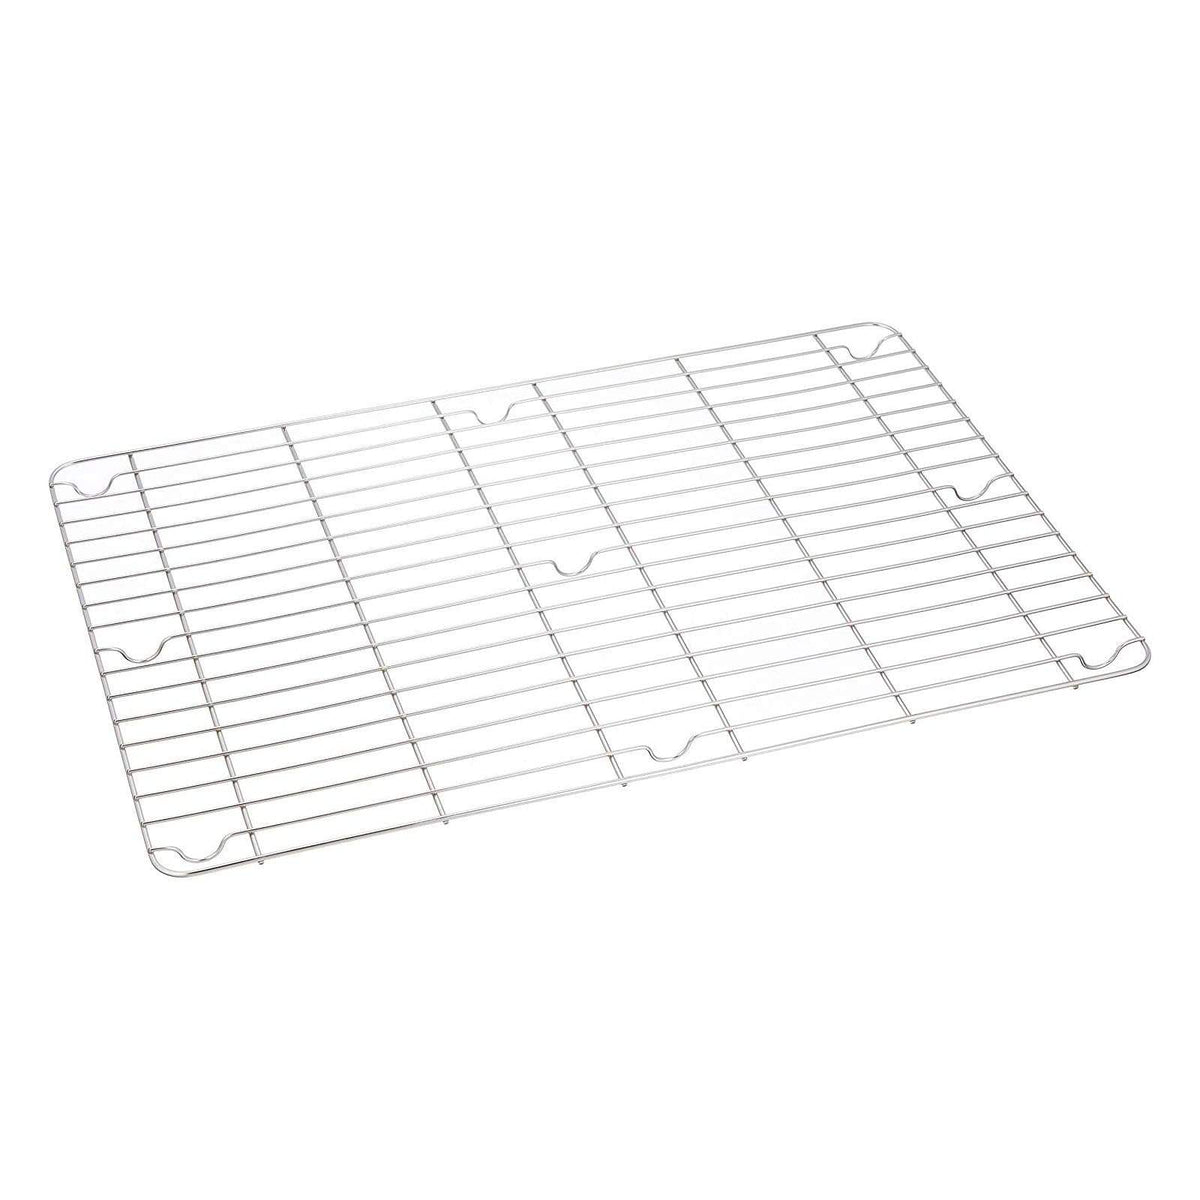 Ikeda Ecoclean Square Mesh Bat Pitch Width 6 mm (9 Sizes) No.2 (418x278mm) Cooling rack